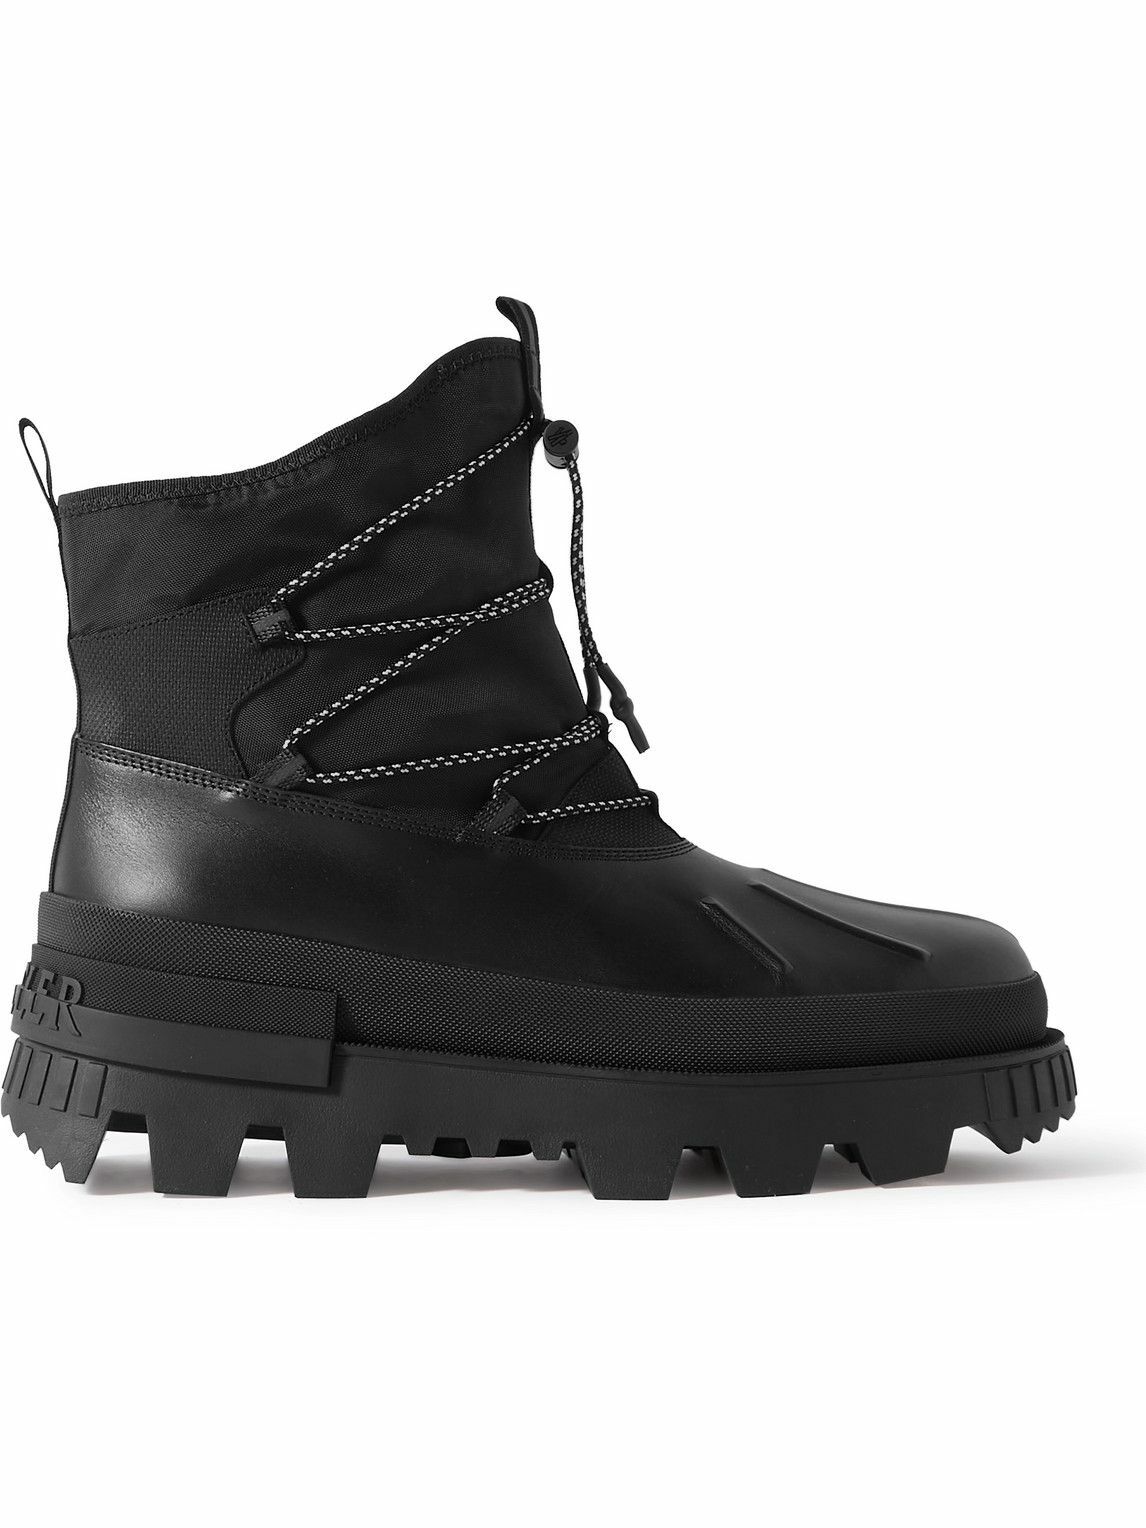 Moncler - Mallard Nylon and Leather Boots - Black Moncler